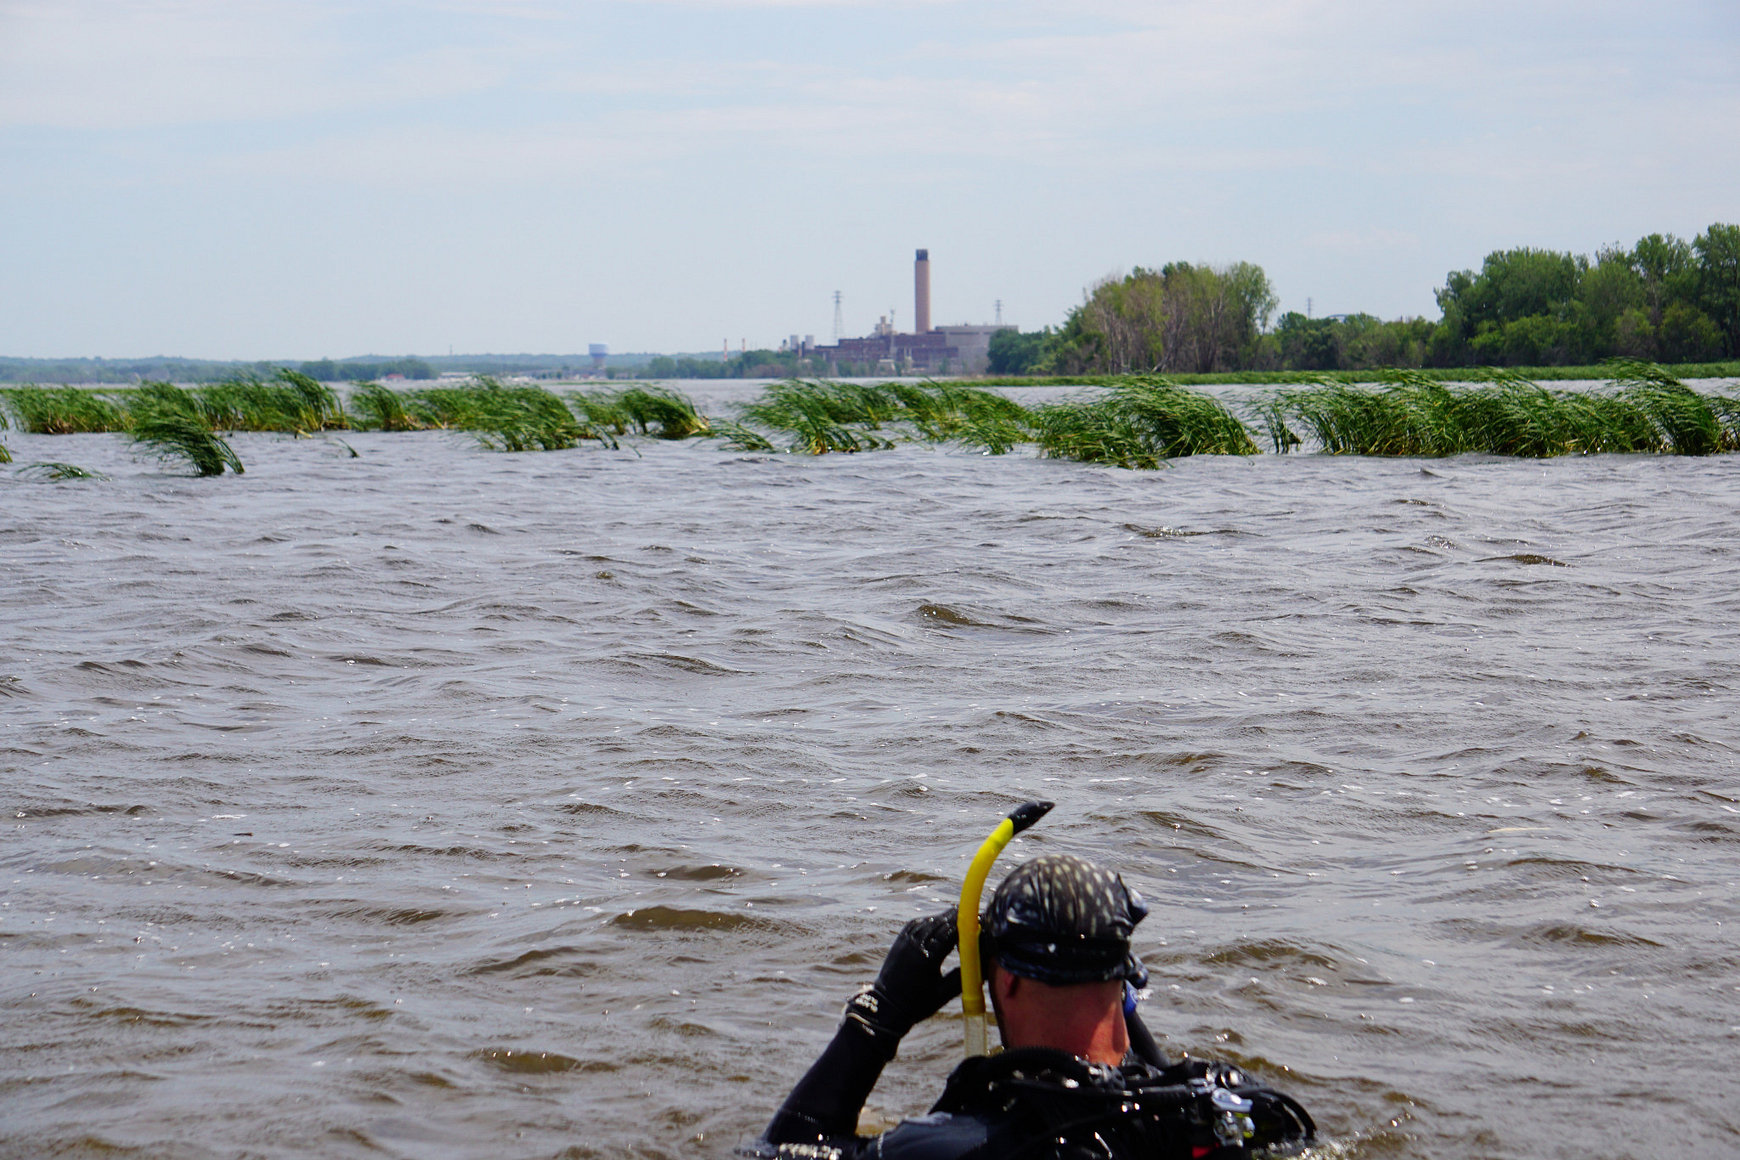 A diver in scuba gear floats on surface of water with aquatic vegetation and power plant in background